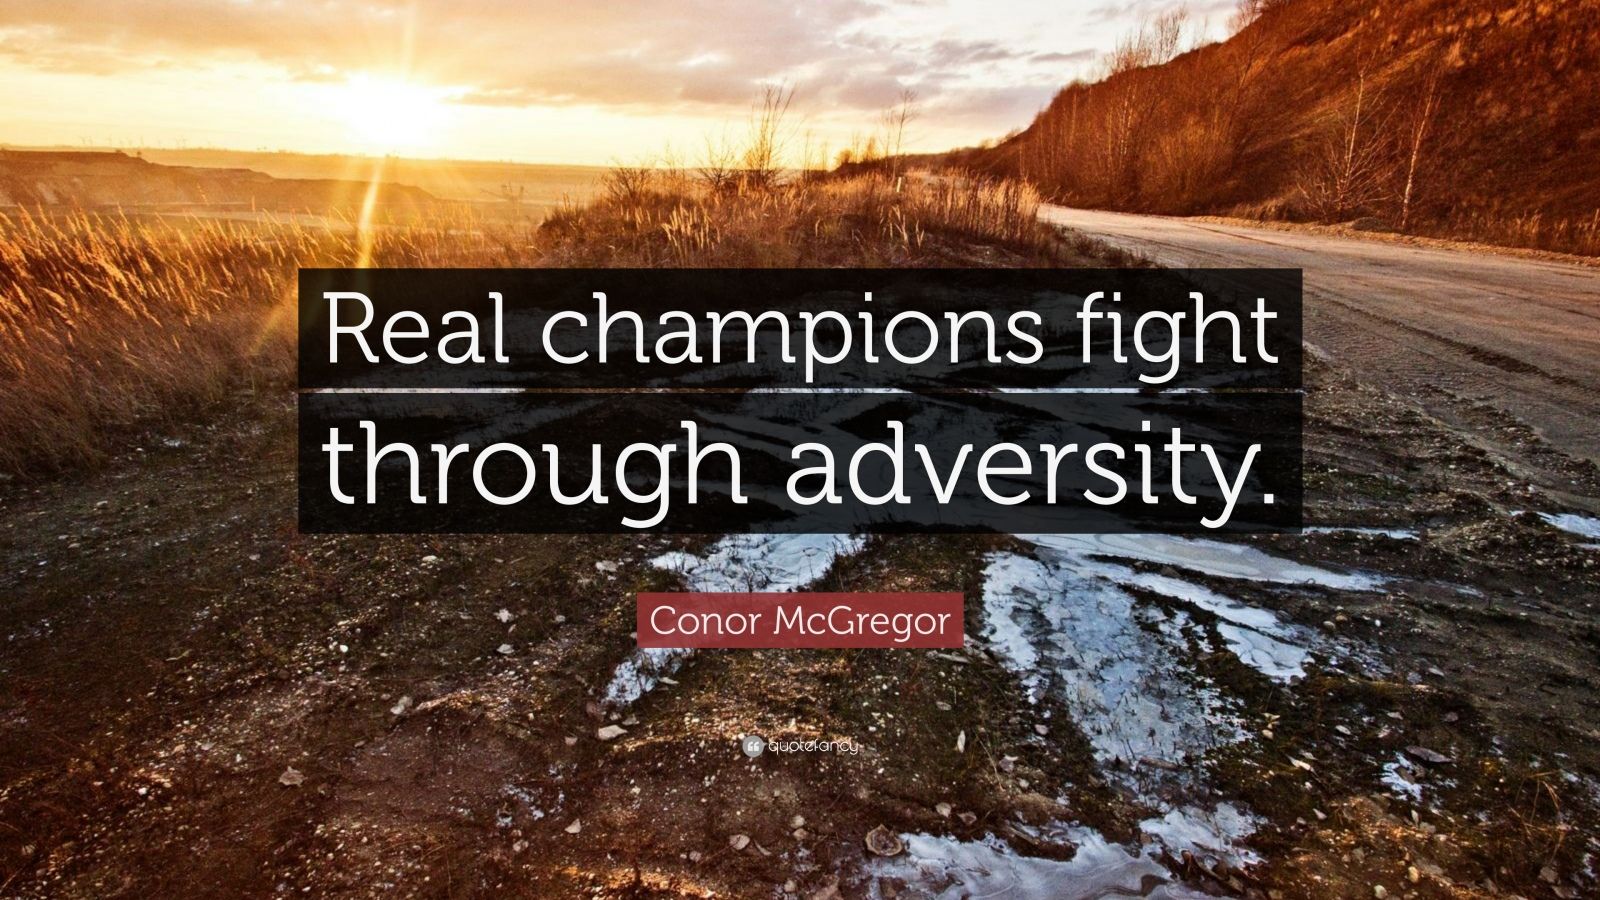 Conor McGregor Quote: “Real champions fight through adversity.” (17 wallpapers ...1600 x 900